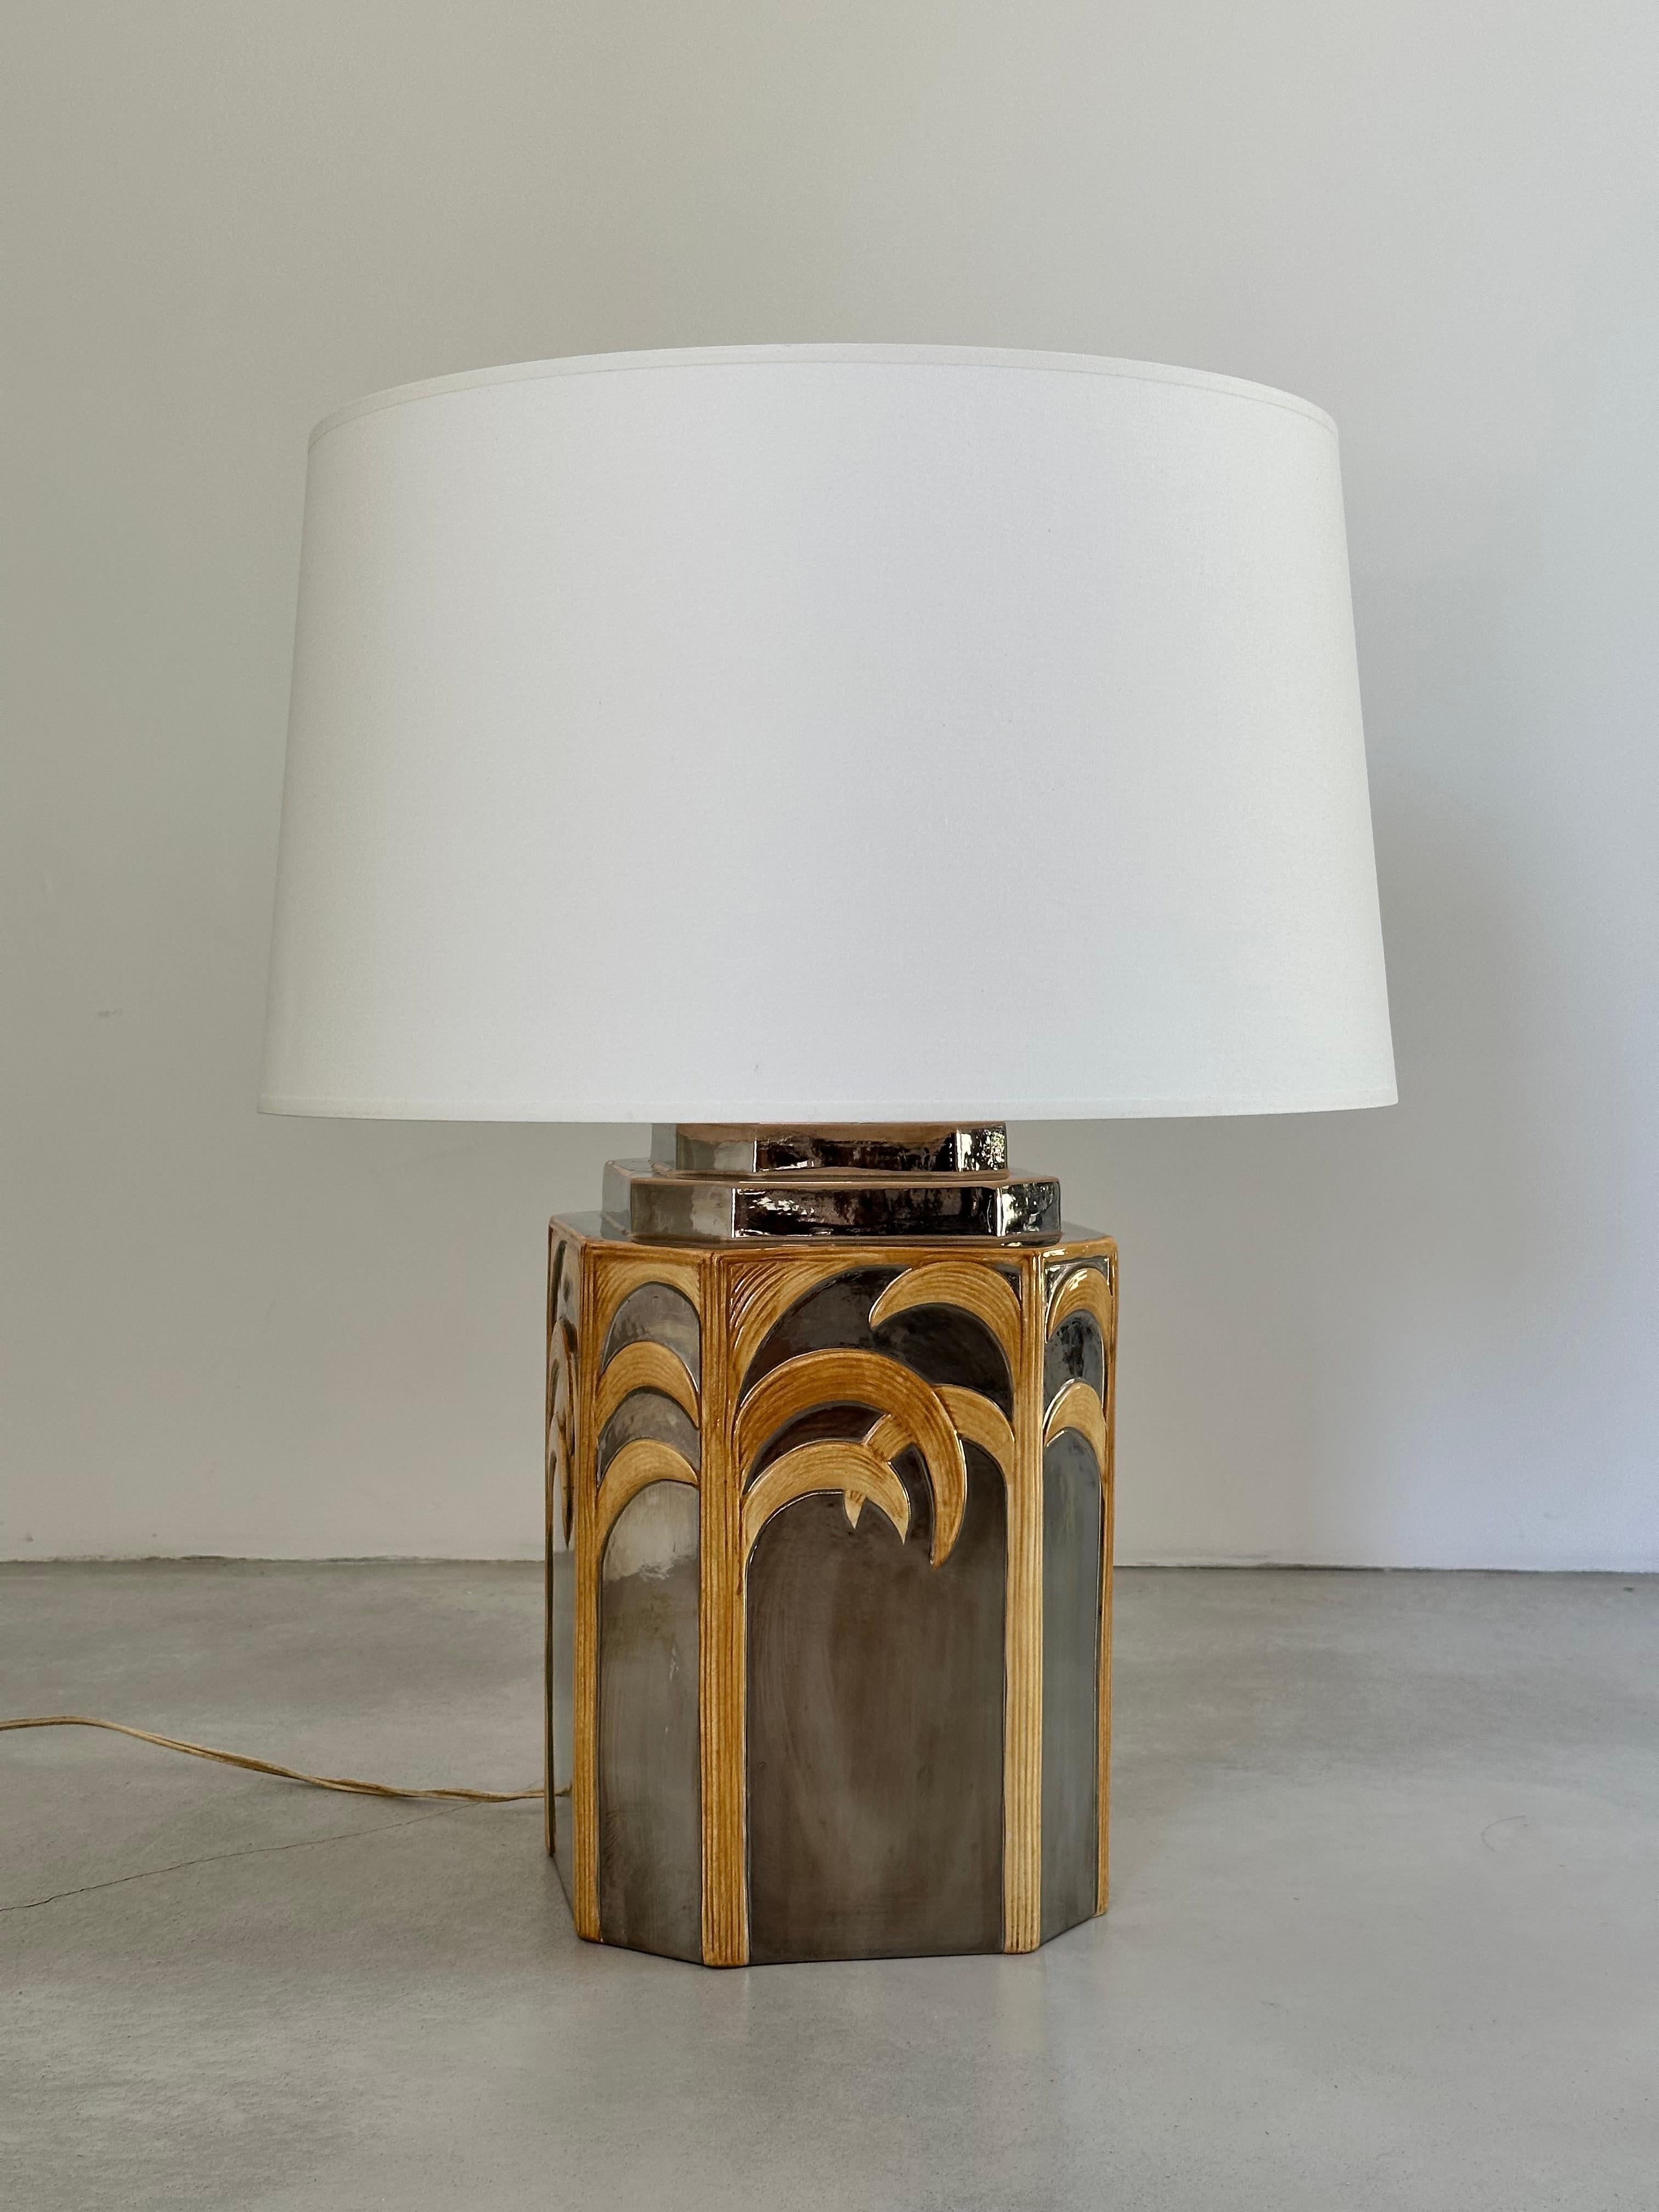 An elegant ceramic lamp made by Italian Vivai Del SUD.

Chrome-plated ceramic with beige-coloured palm tree decor.
Good condition (traces of time).

height of the lamp with lampshade 60 cm
The dimensions of the lamp without the lampshade:
Height